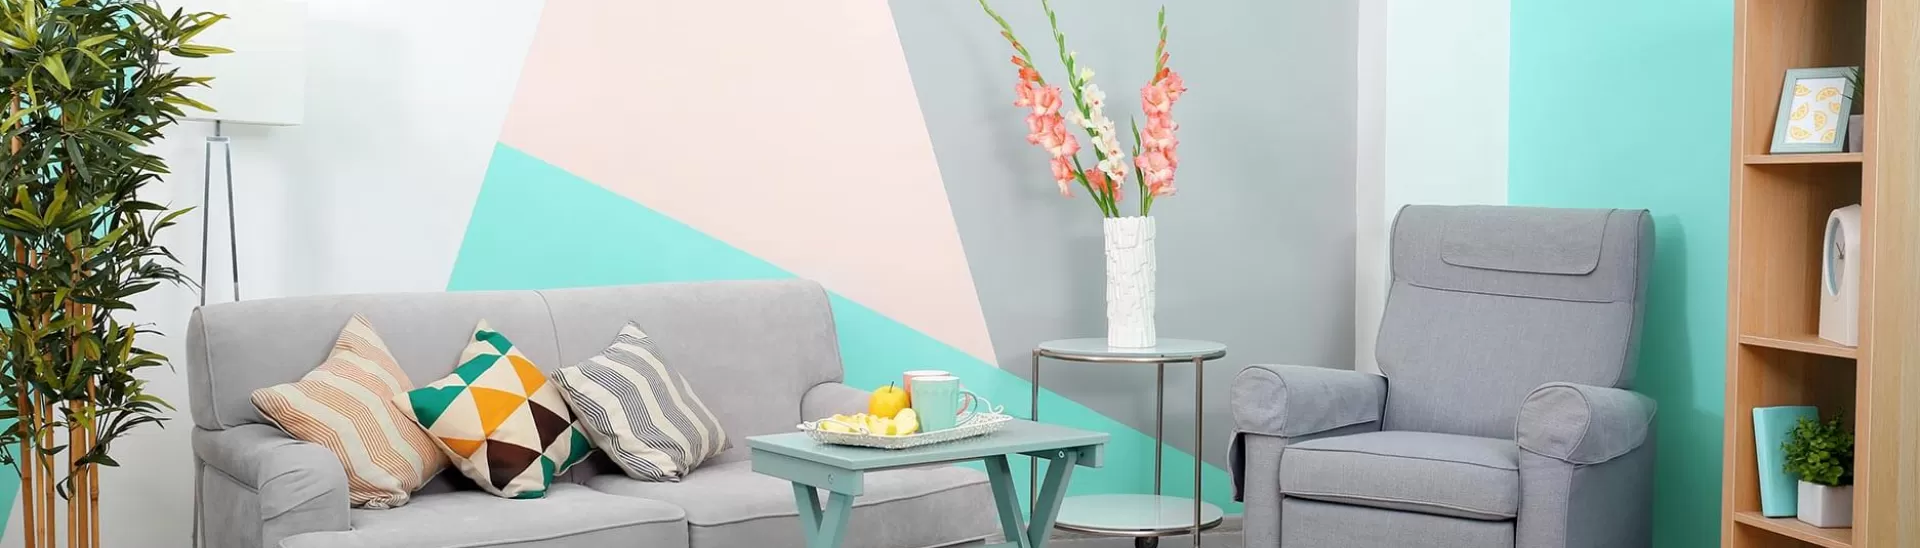 And the Colour Forecast for 2019 is Pastels!